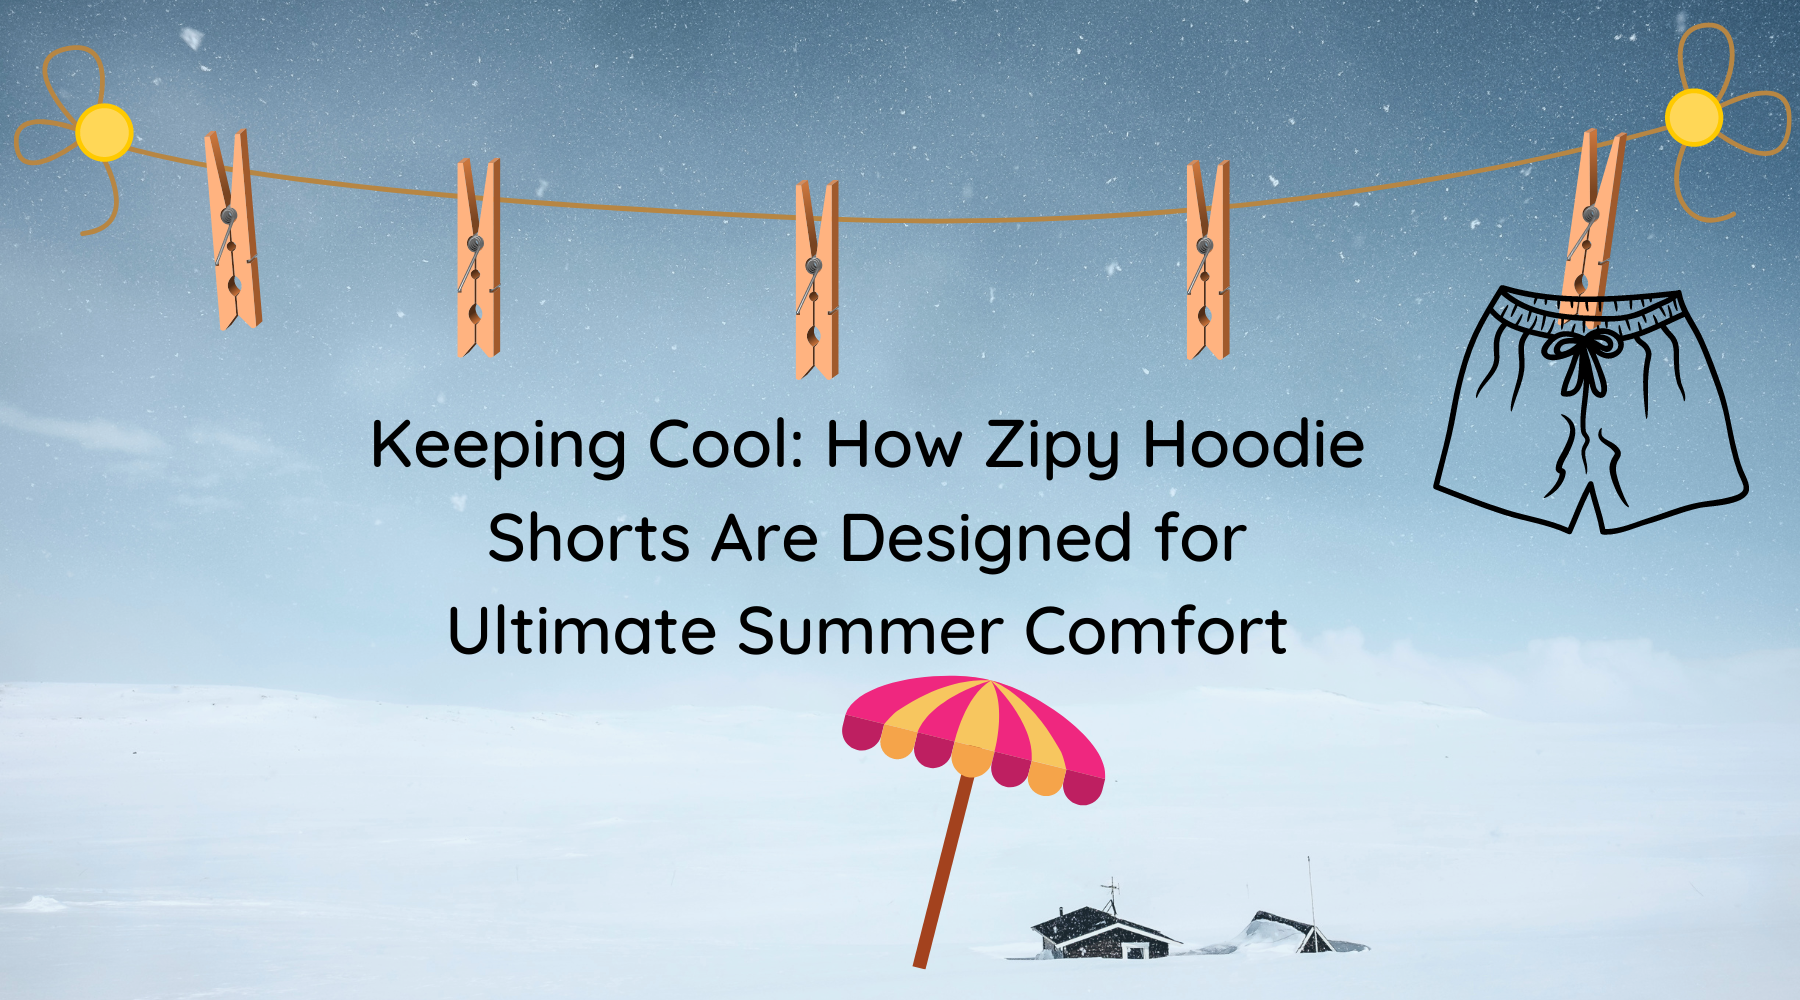 Keeping Cool: How Zipy Hoodie Shorts Are Designed for Ultimate Summer Comfort